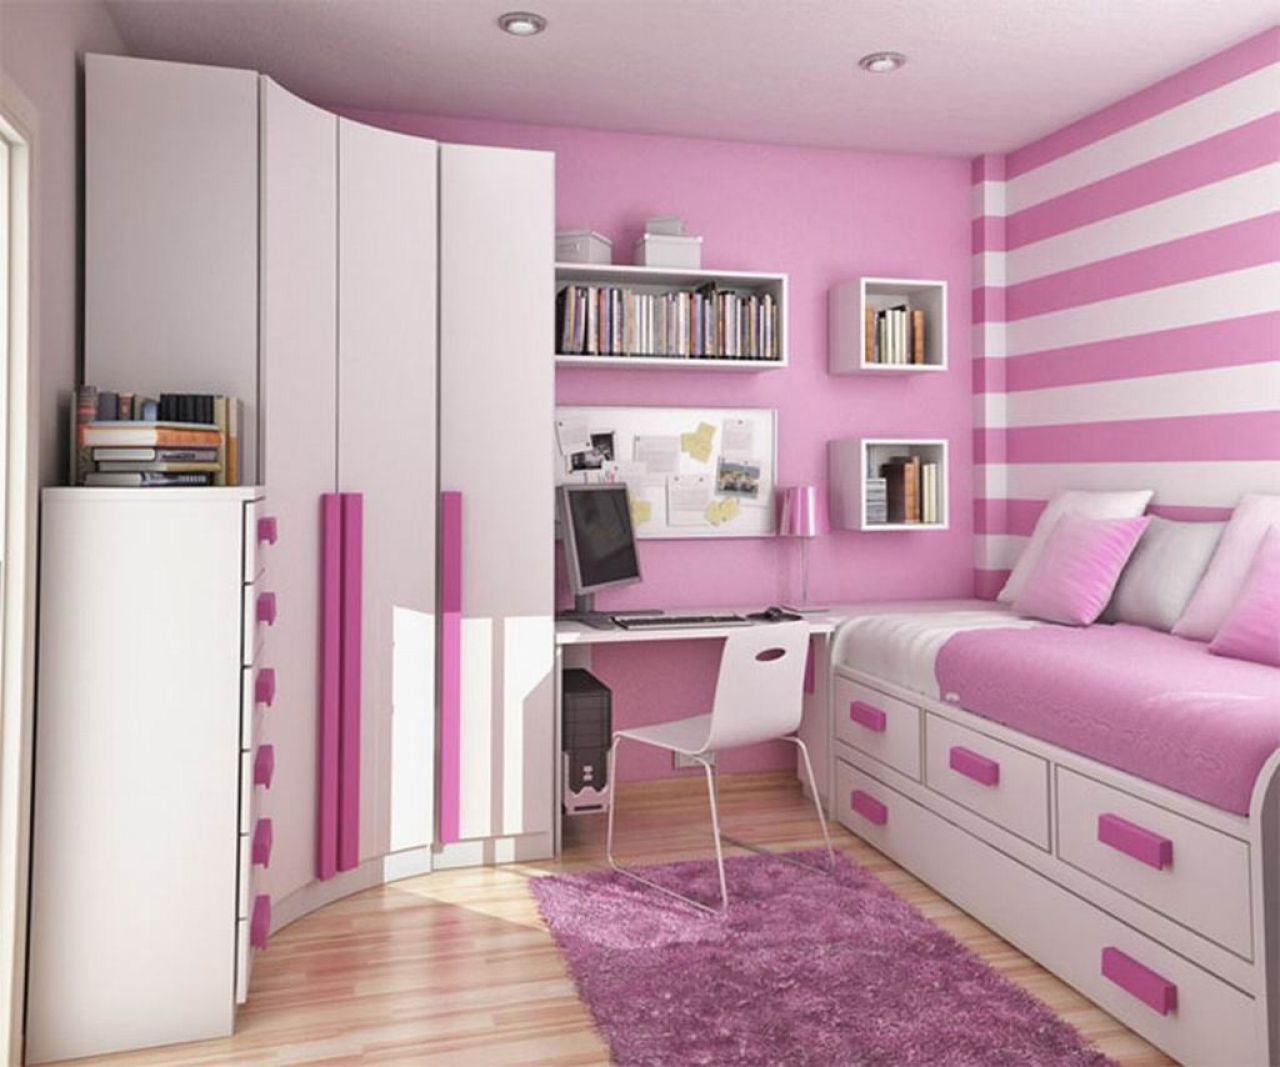 BEDROOM STRIPE WHITE AND PINK WALLPAPER DECOR FOR TEENAGE GIRLS ...